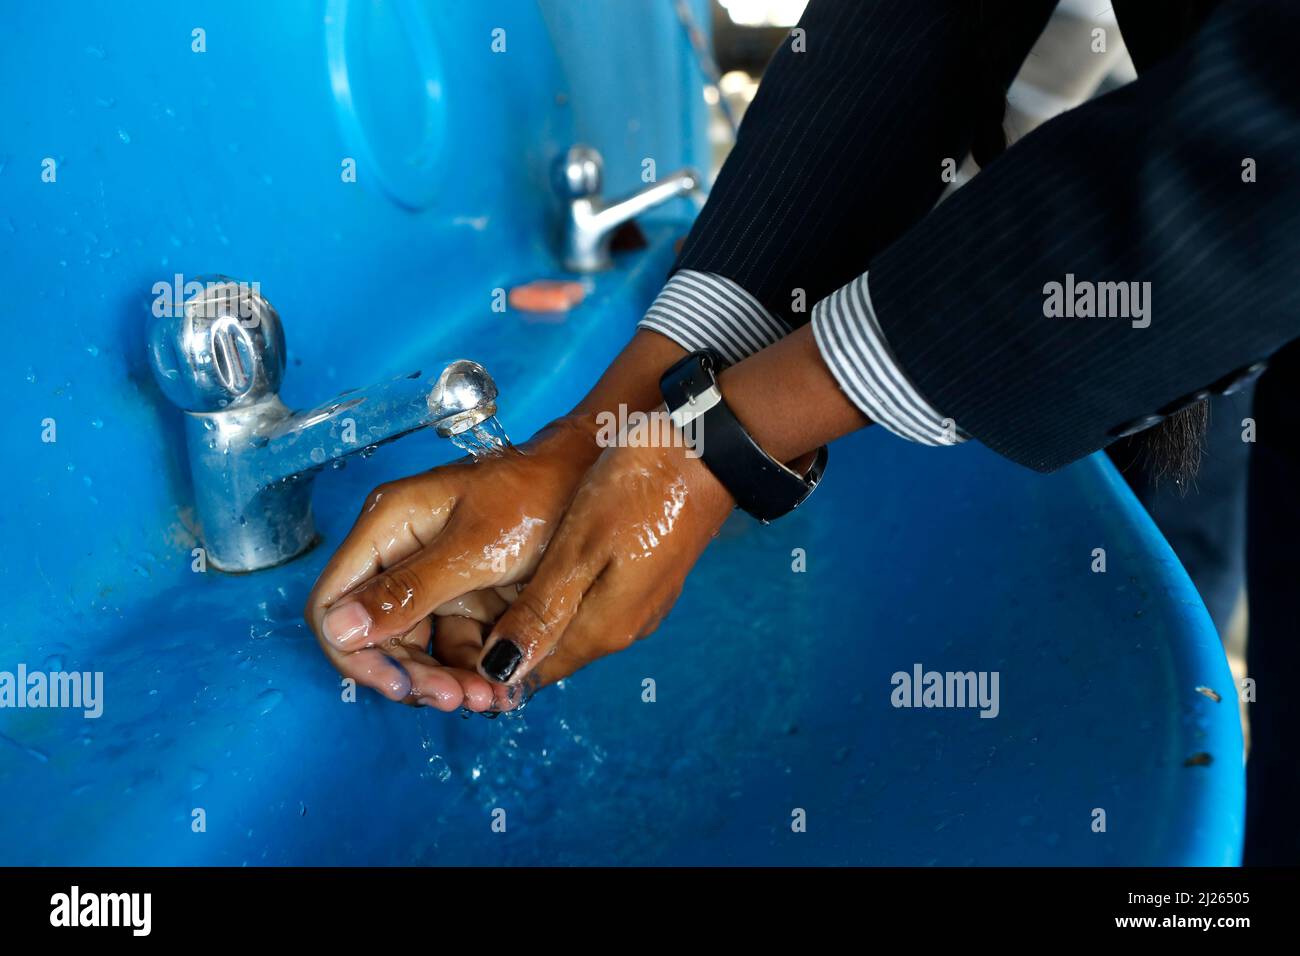 Secondary school. Boy school wash his hands with soap in the sink. Stock Photo